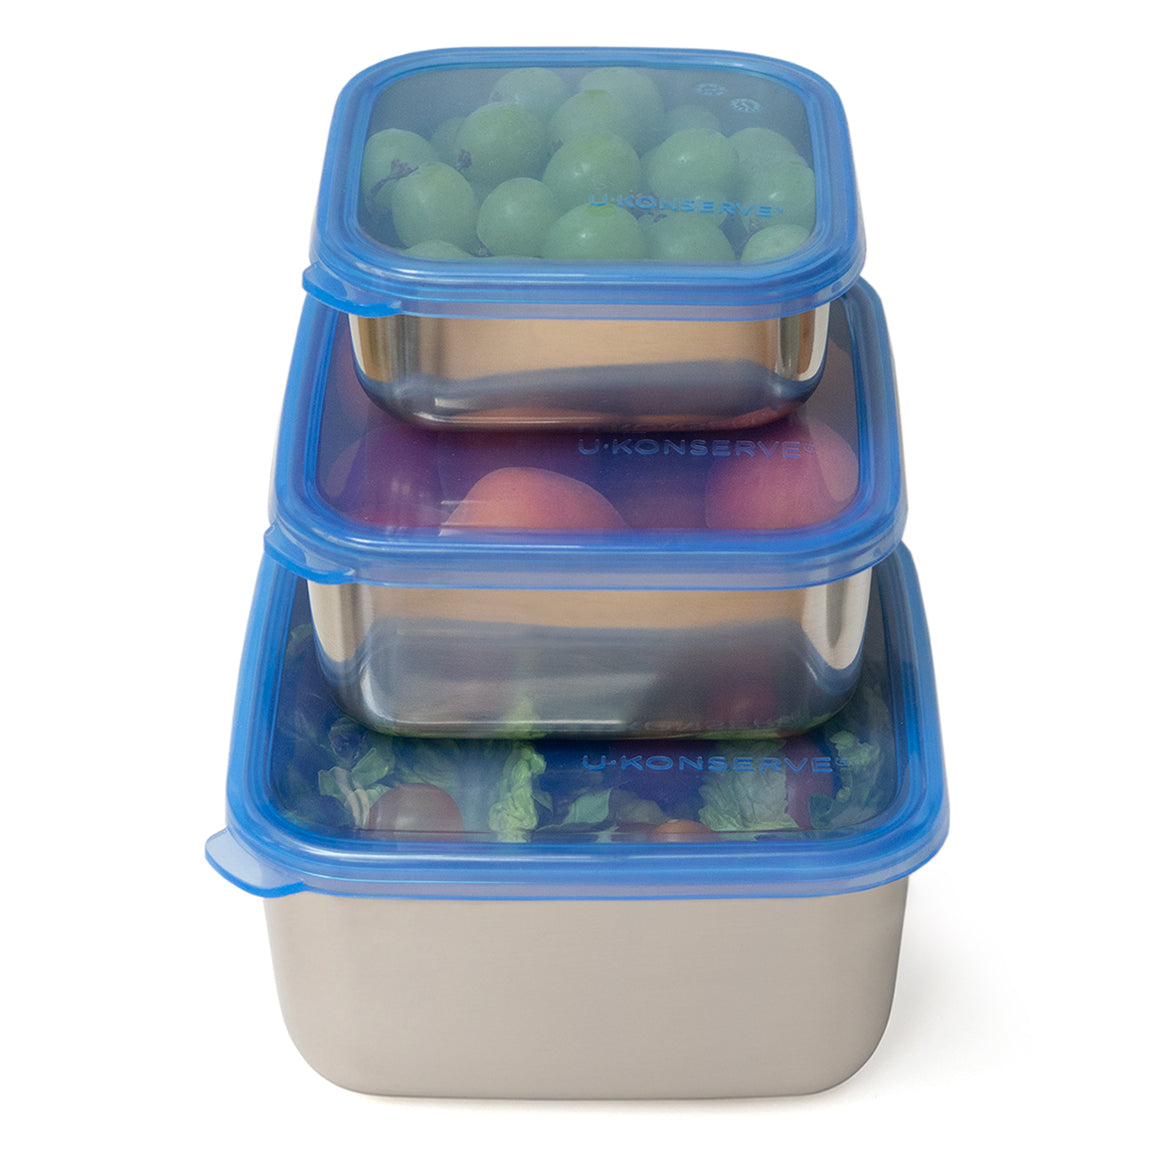  24 Pieces Large Food Storage Containers, Plastic Food Container  Set with Lid for Kitchen Storage Stackable & Nested Airtight Lunch Box for  Cereal Fruit Leftover Meal Prep Freezer Microwave Safe 3